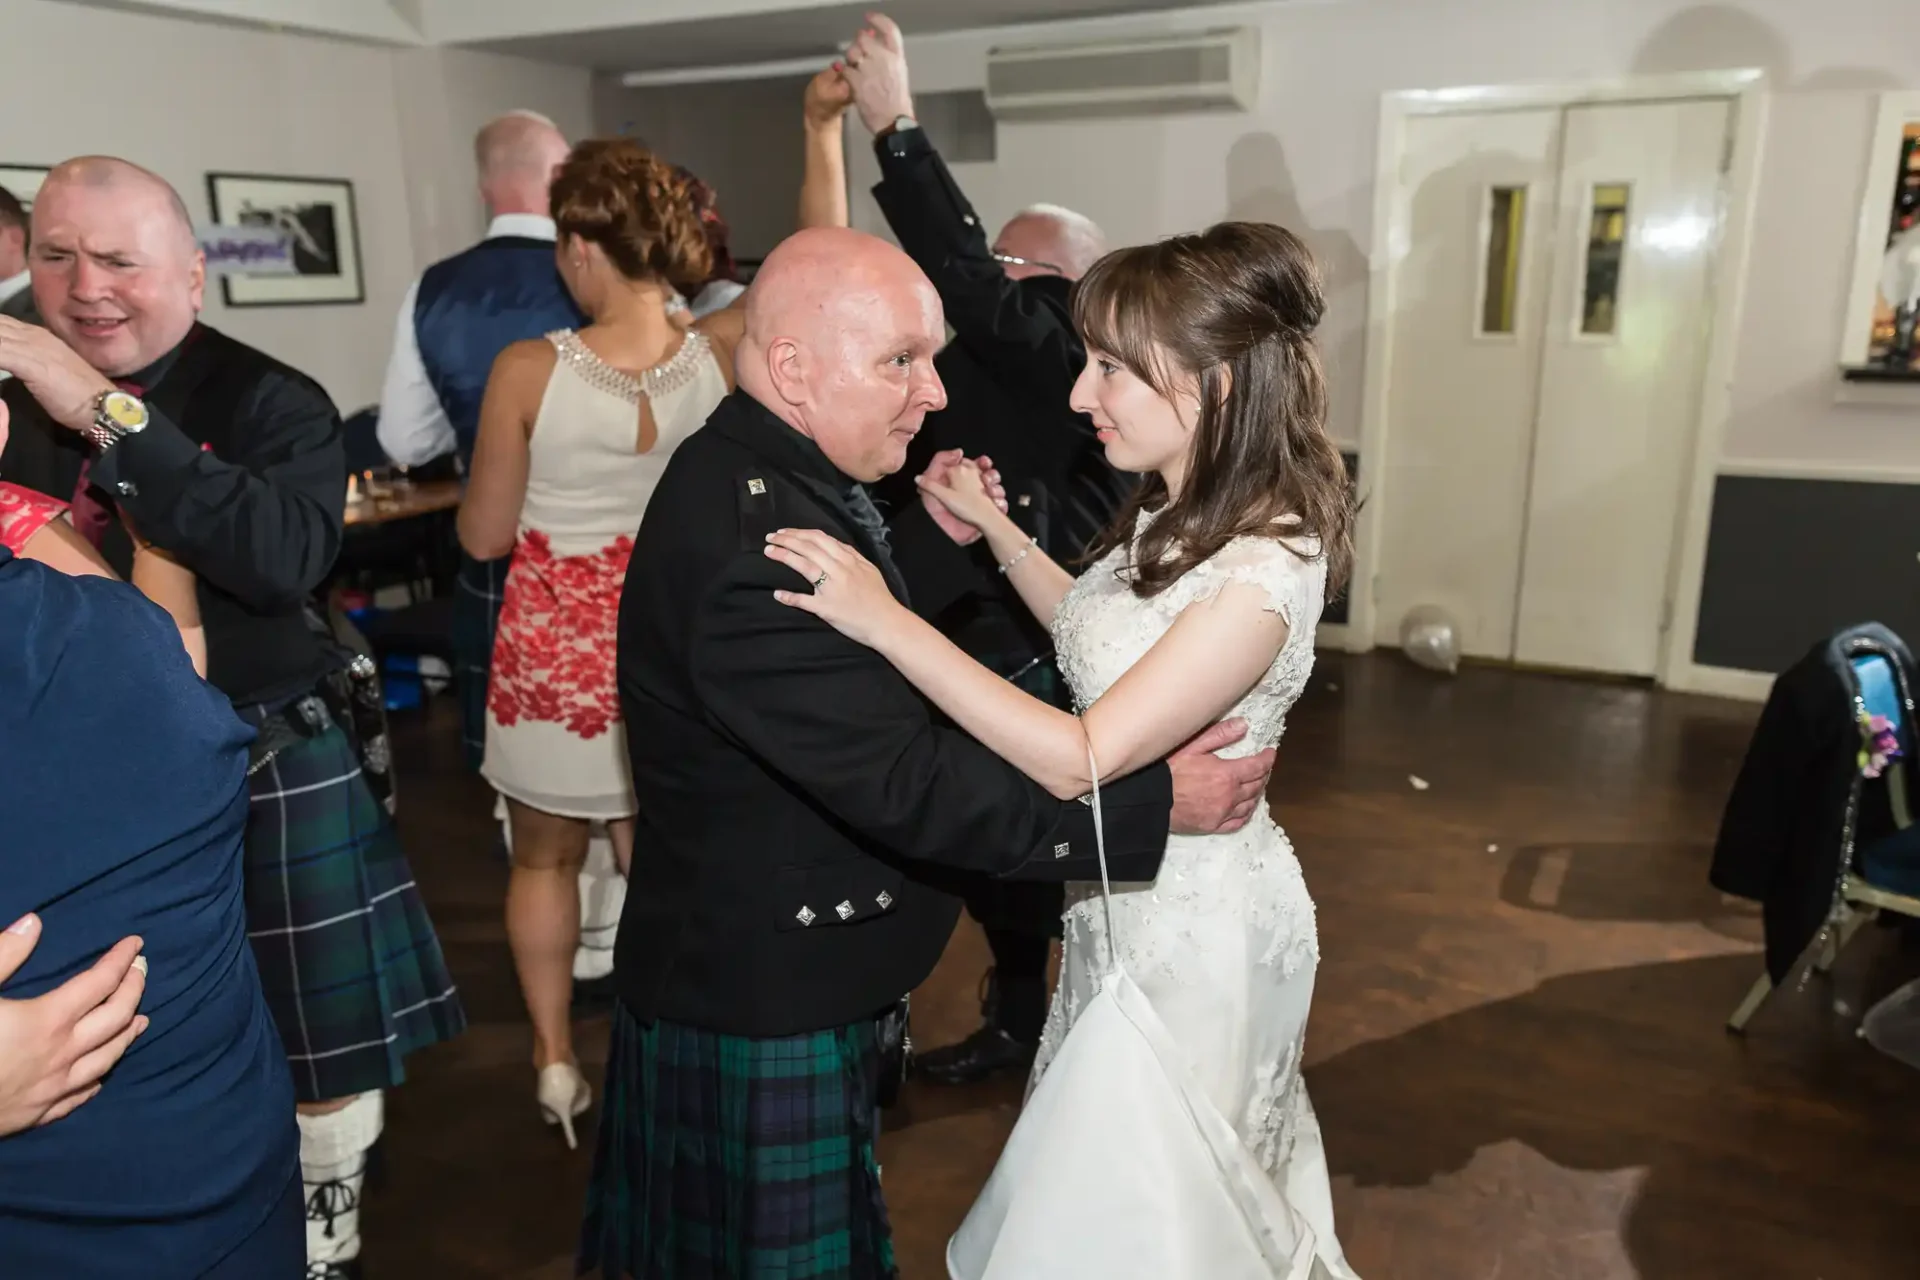 A bride in a white dress dancing closely with a bald man in a dark jacket and kilt at a lively indoor wedding reception.